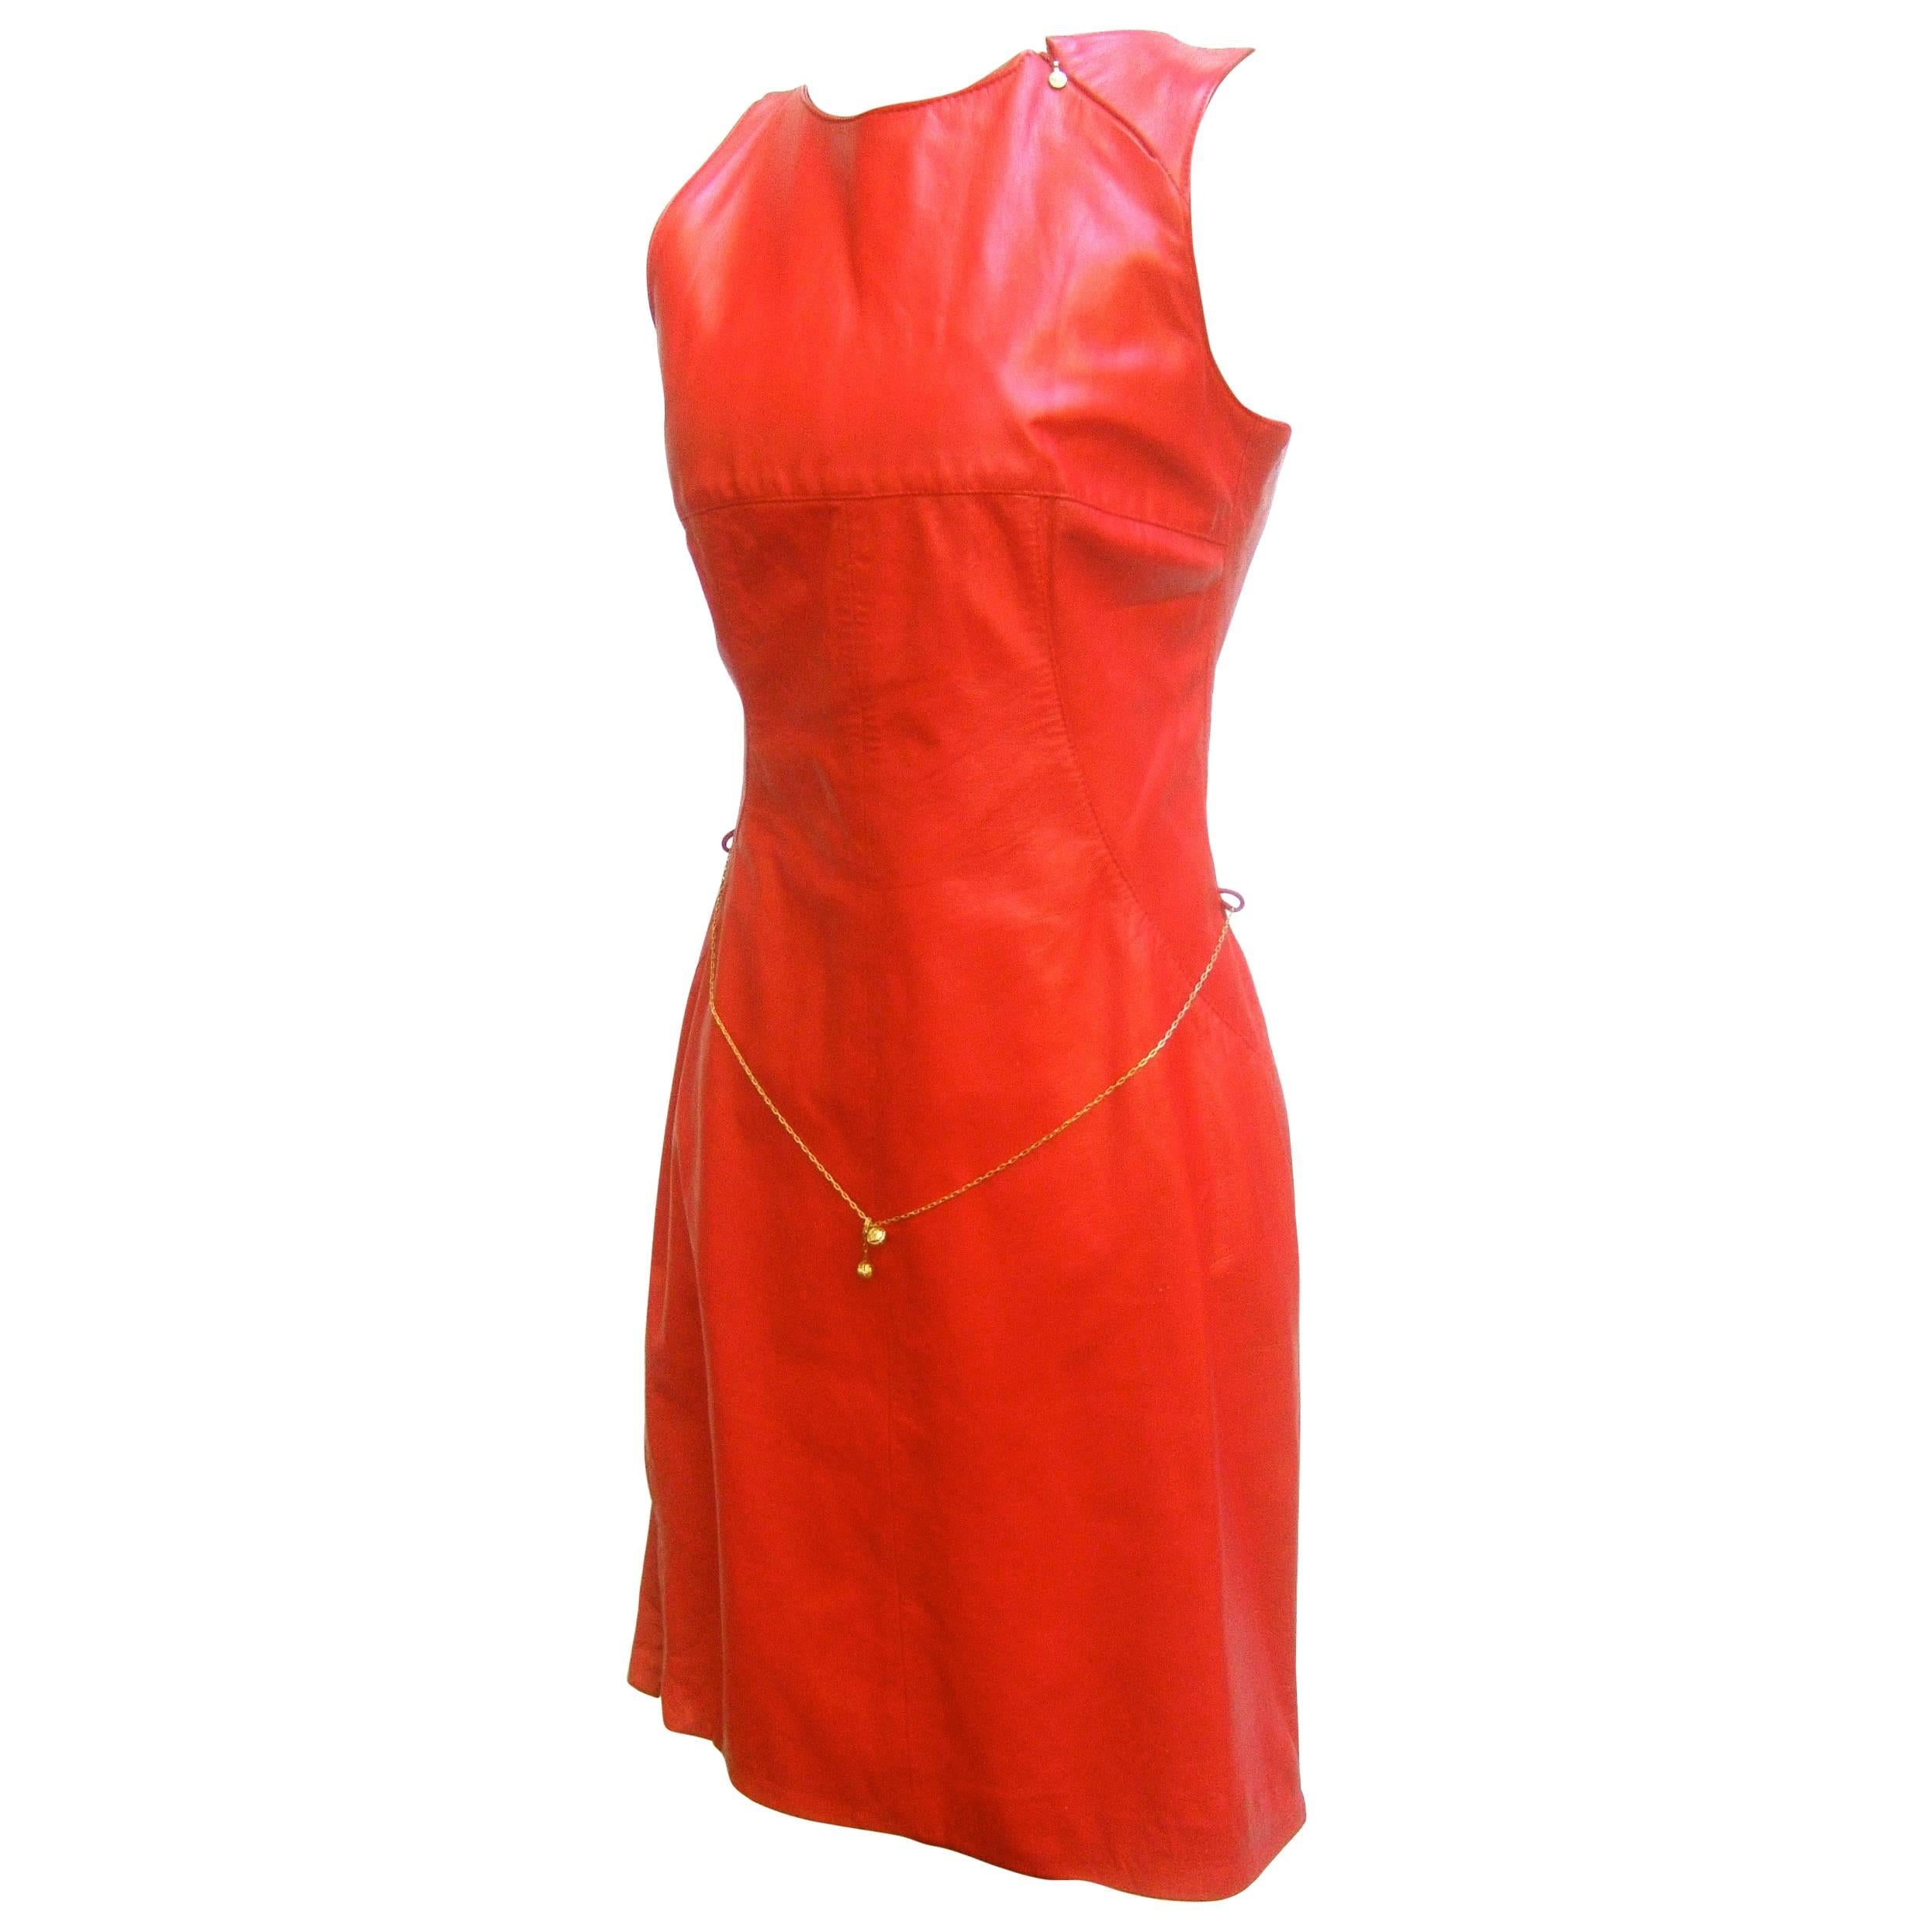 Versace Cherry Red Leather Dress with Gilt Belt. For Sale